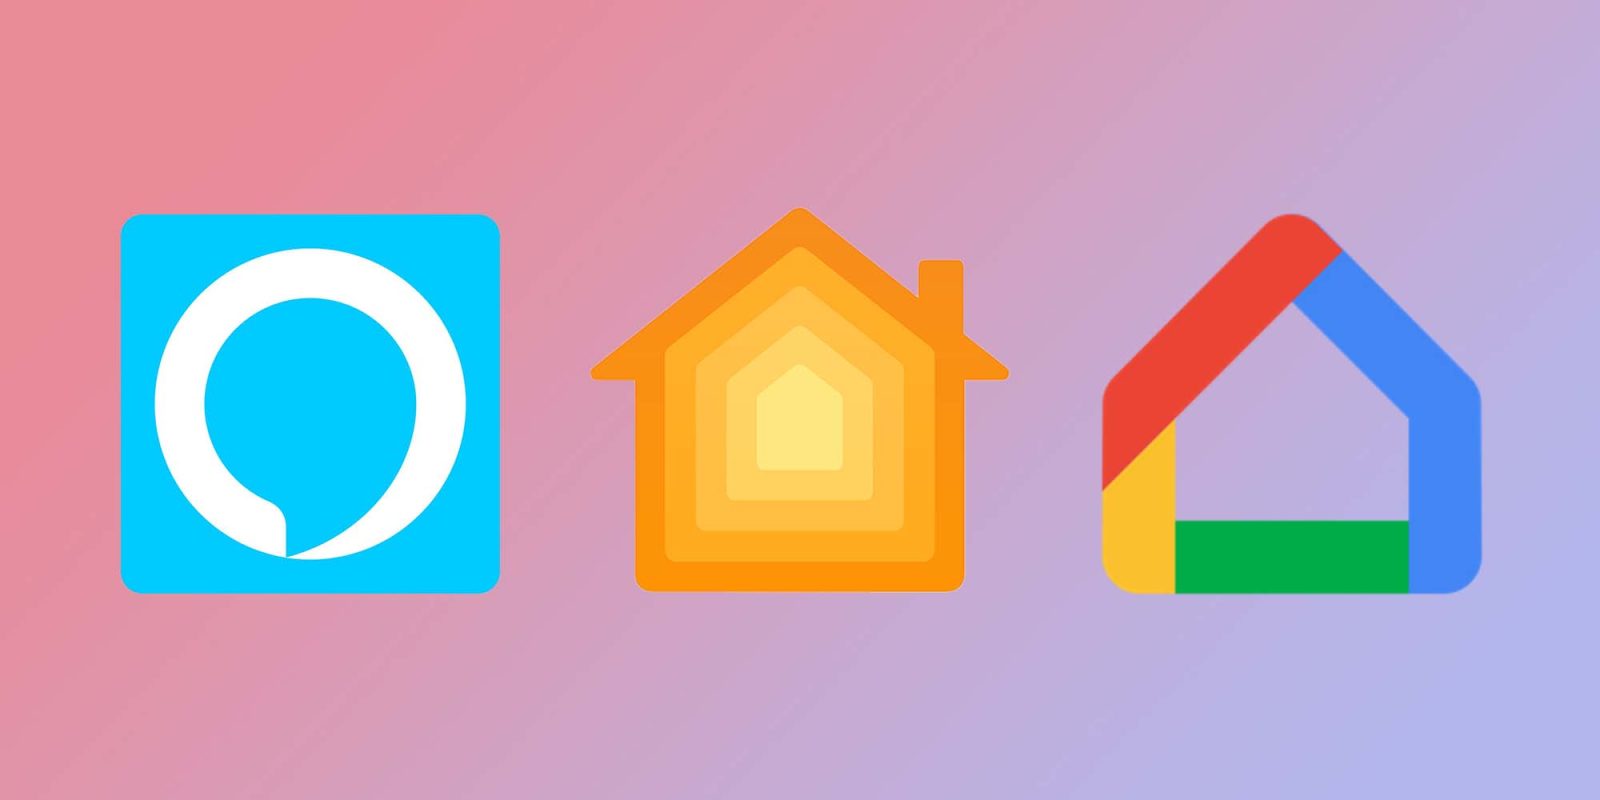 Apple-backed Matter smart home platform officially launches